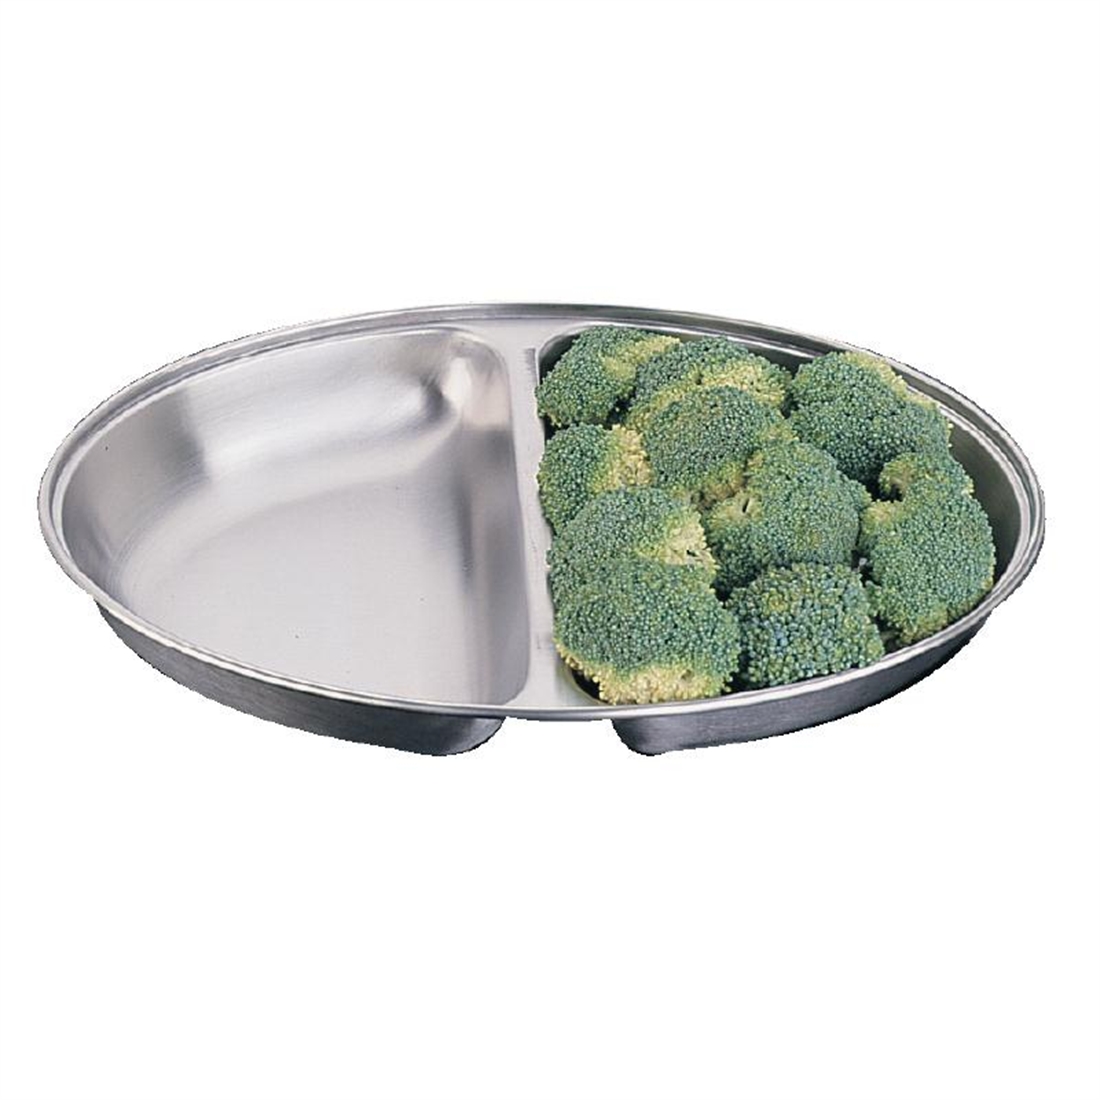 "Olympia Oval Vegetable Dish Two Compartments 300mm"